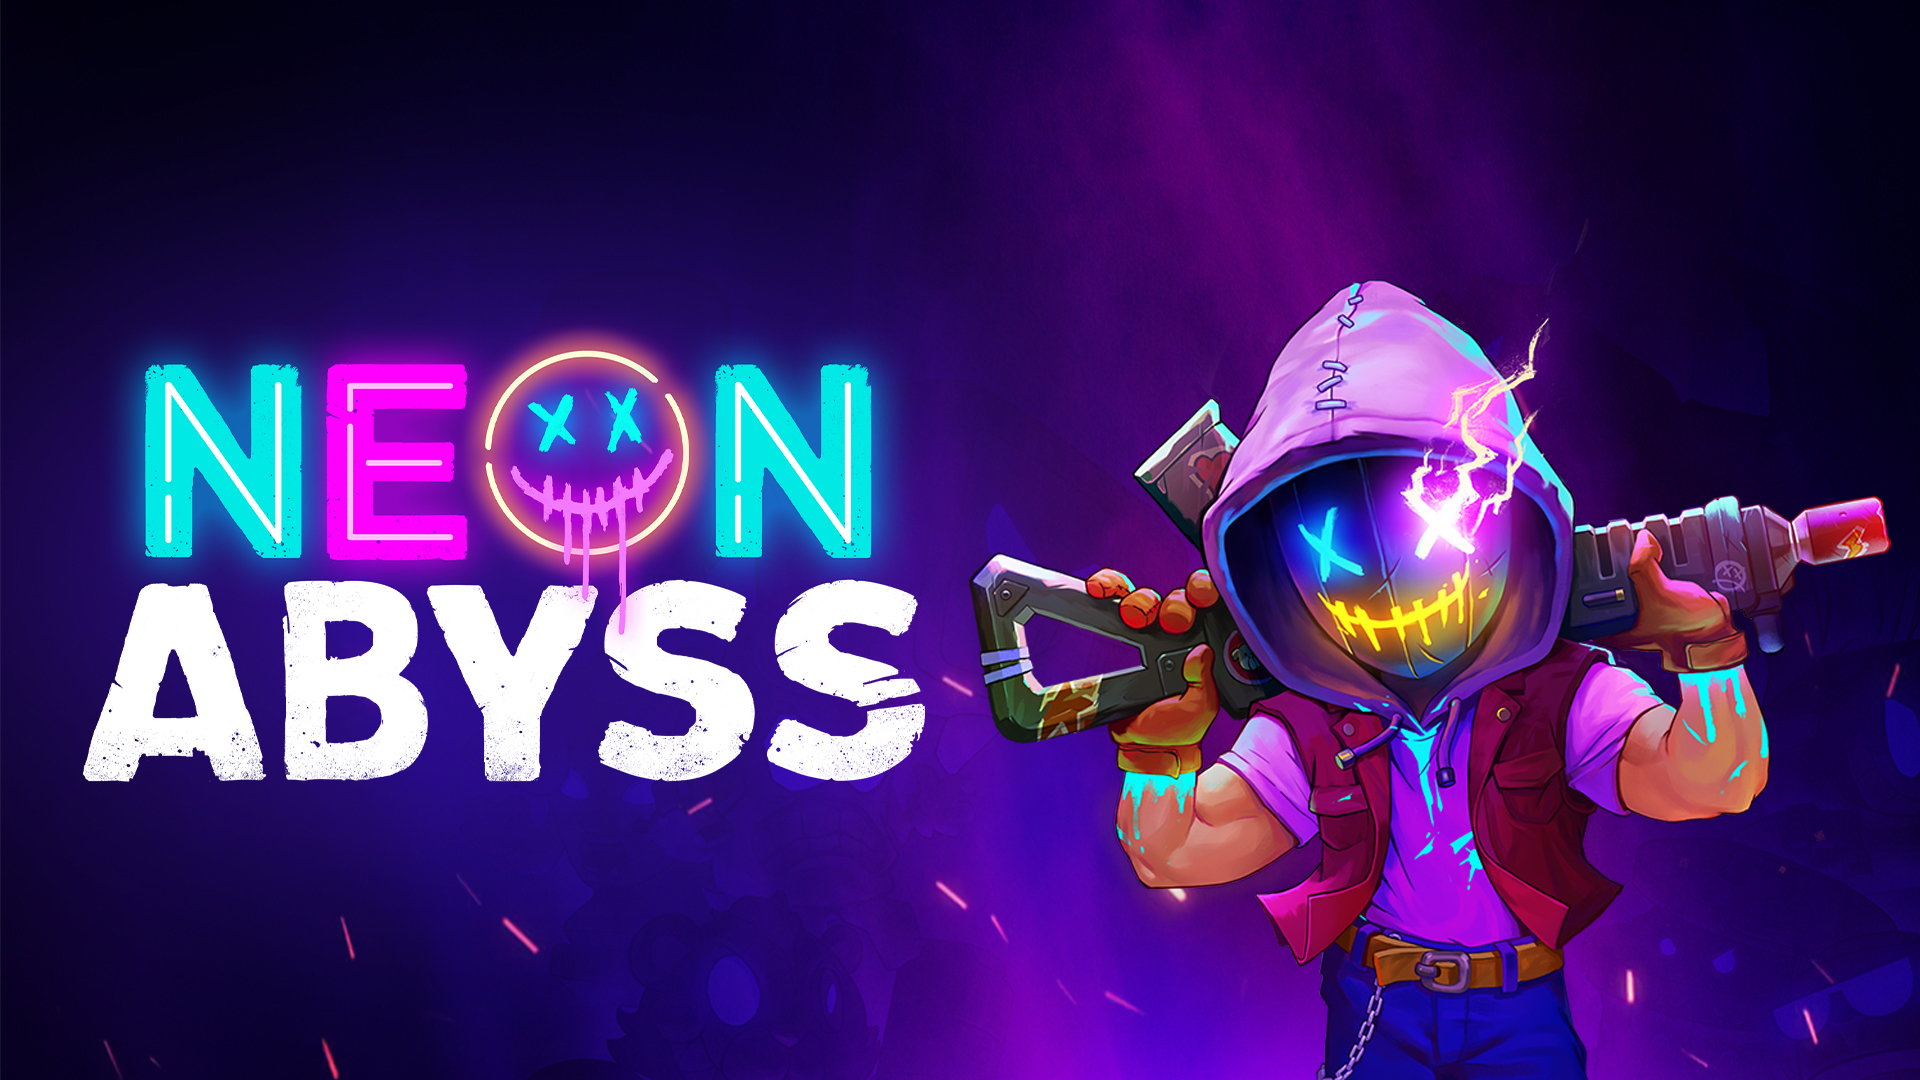 Neon Abyss: Free game from December 17, 2021 on Epic Games Store - Breakflip

